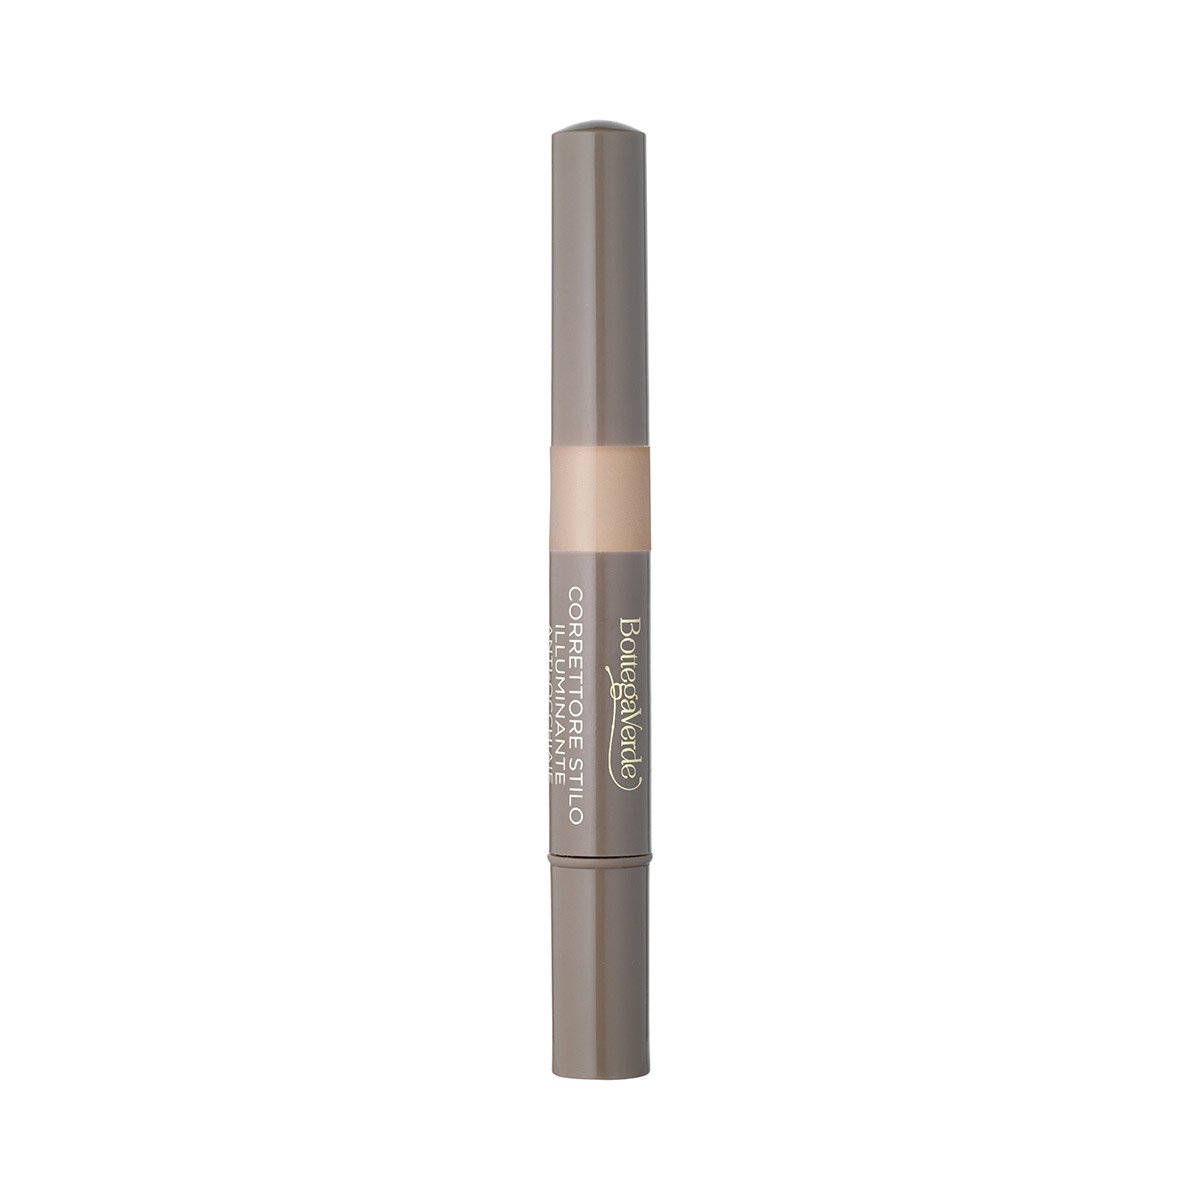 Radiant touch concealer pen anti-dark circles with Vitamin E and Vanilla extract